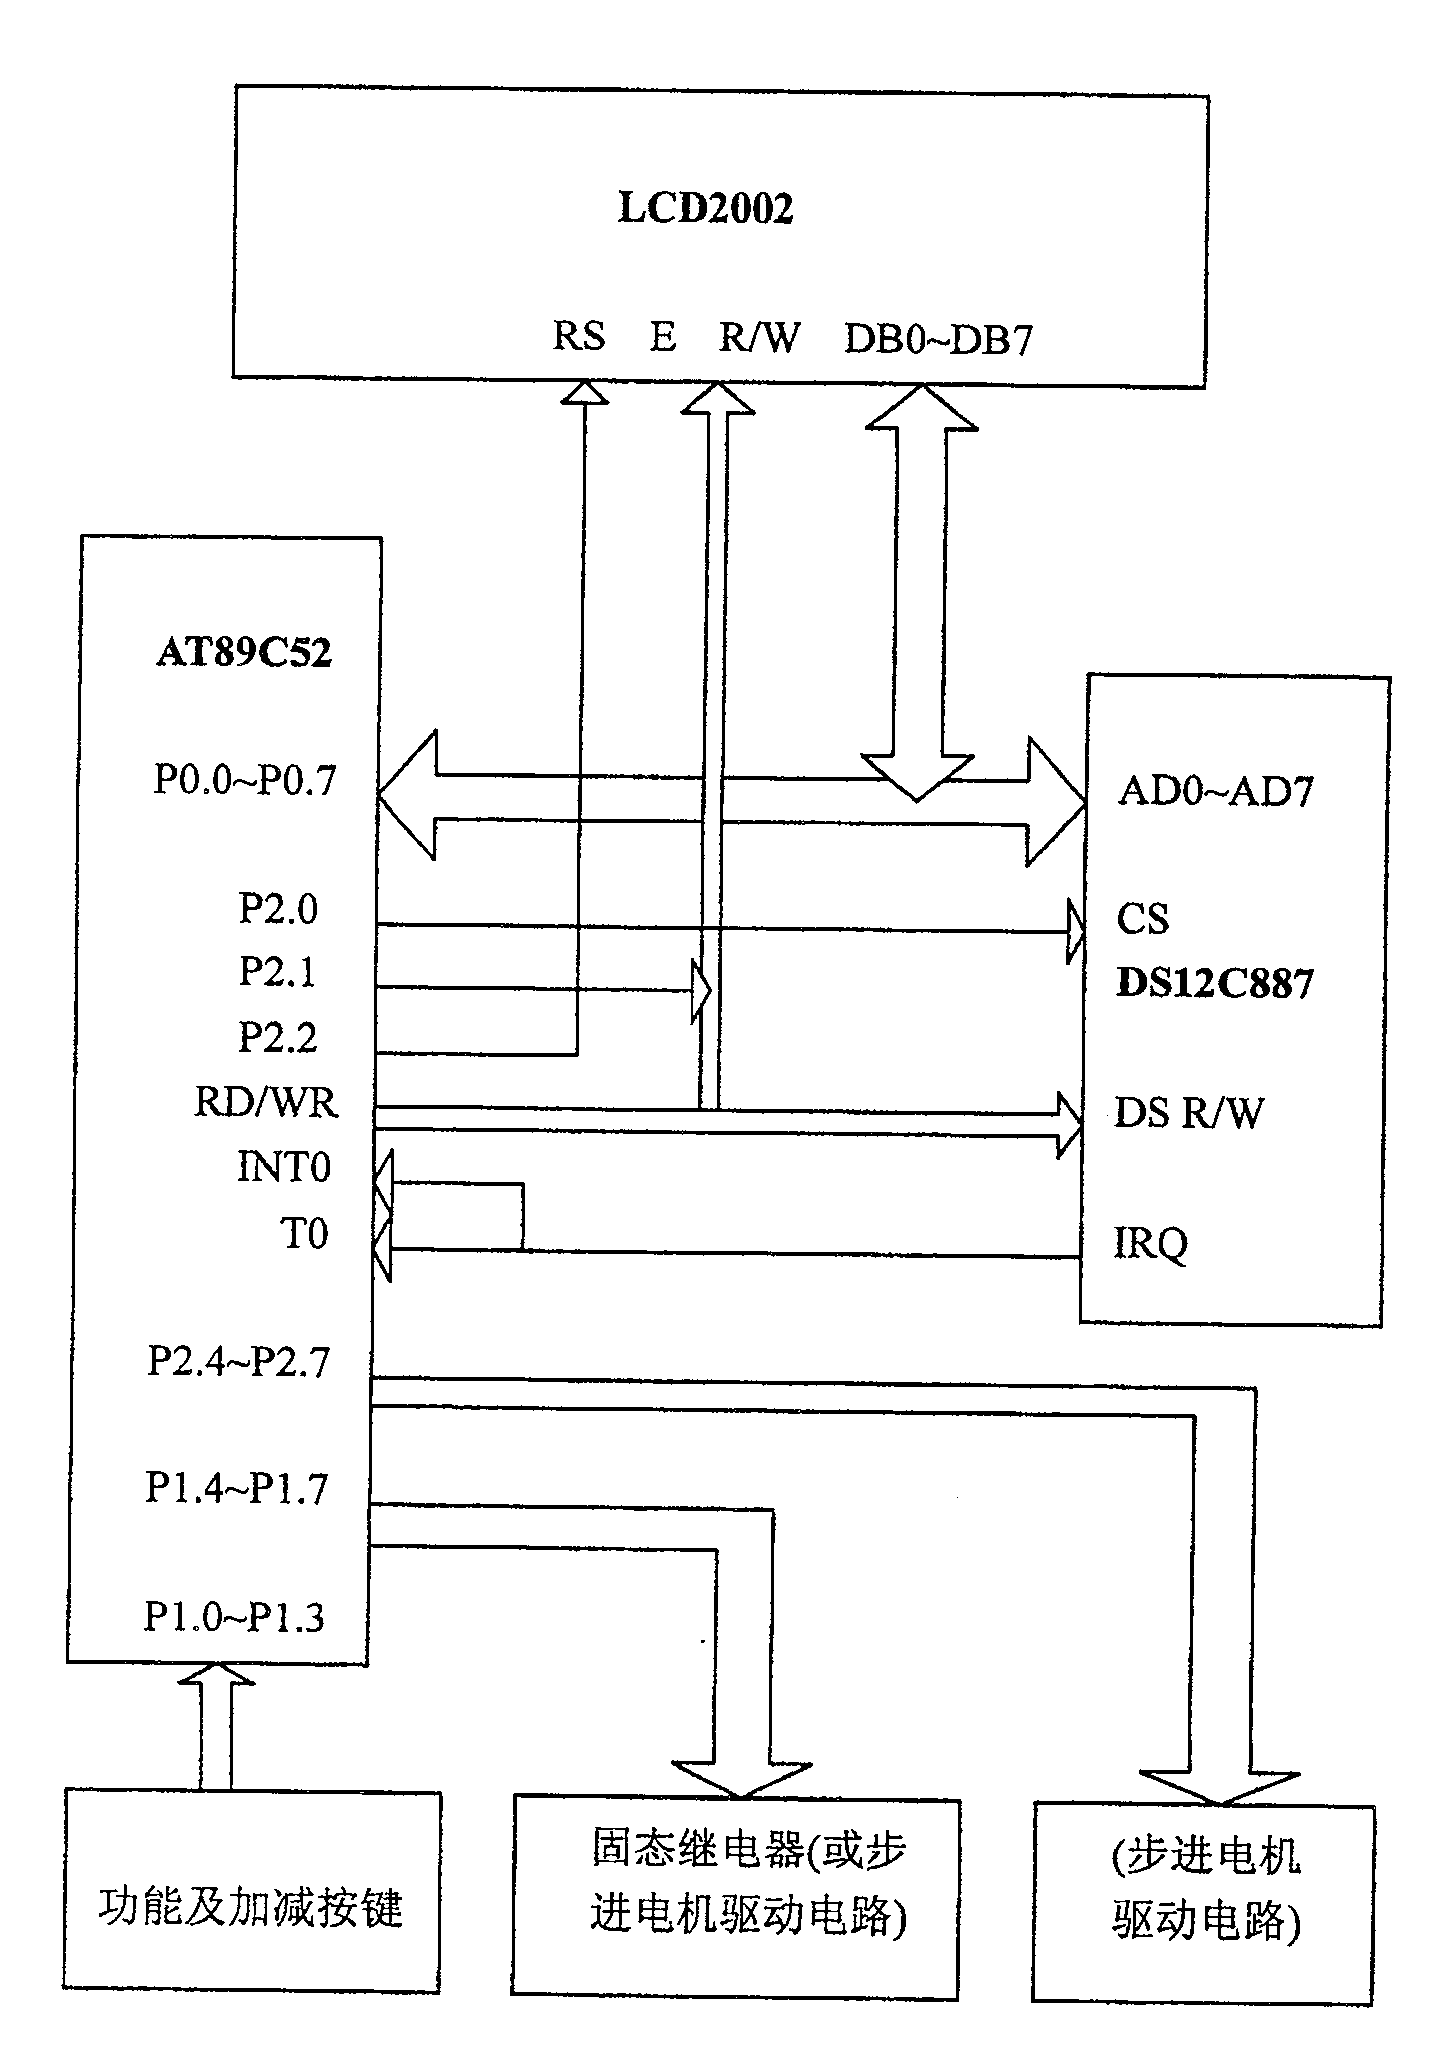 Method and device for controlling automatic tracking sun according to time